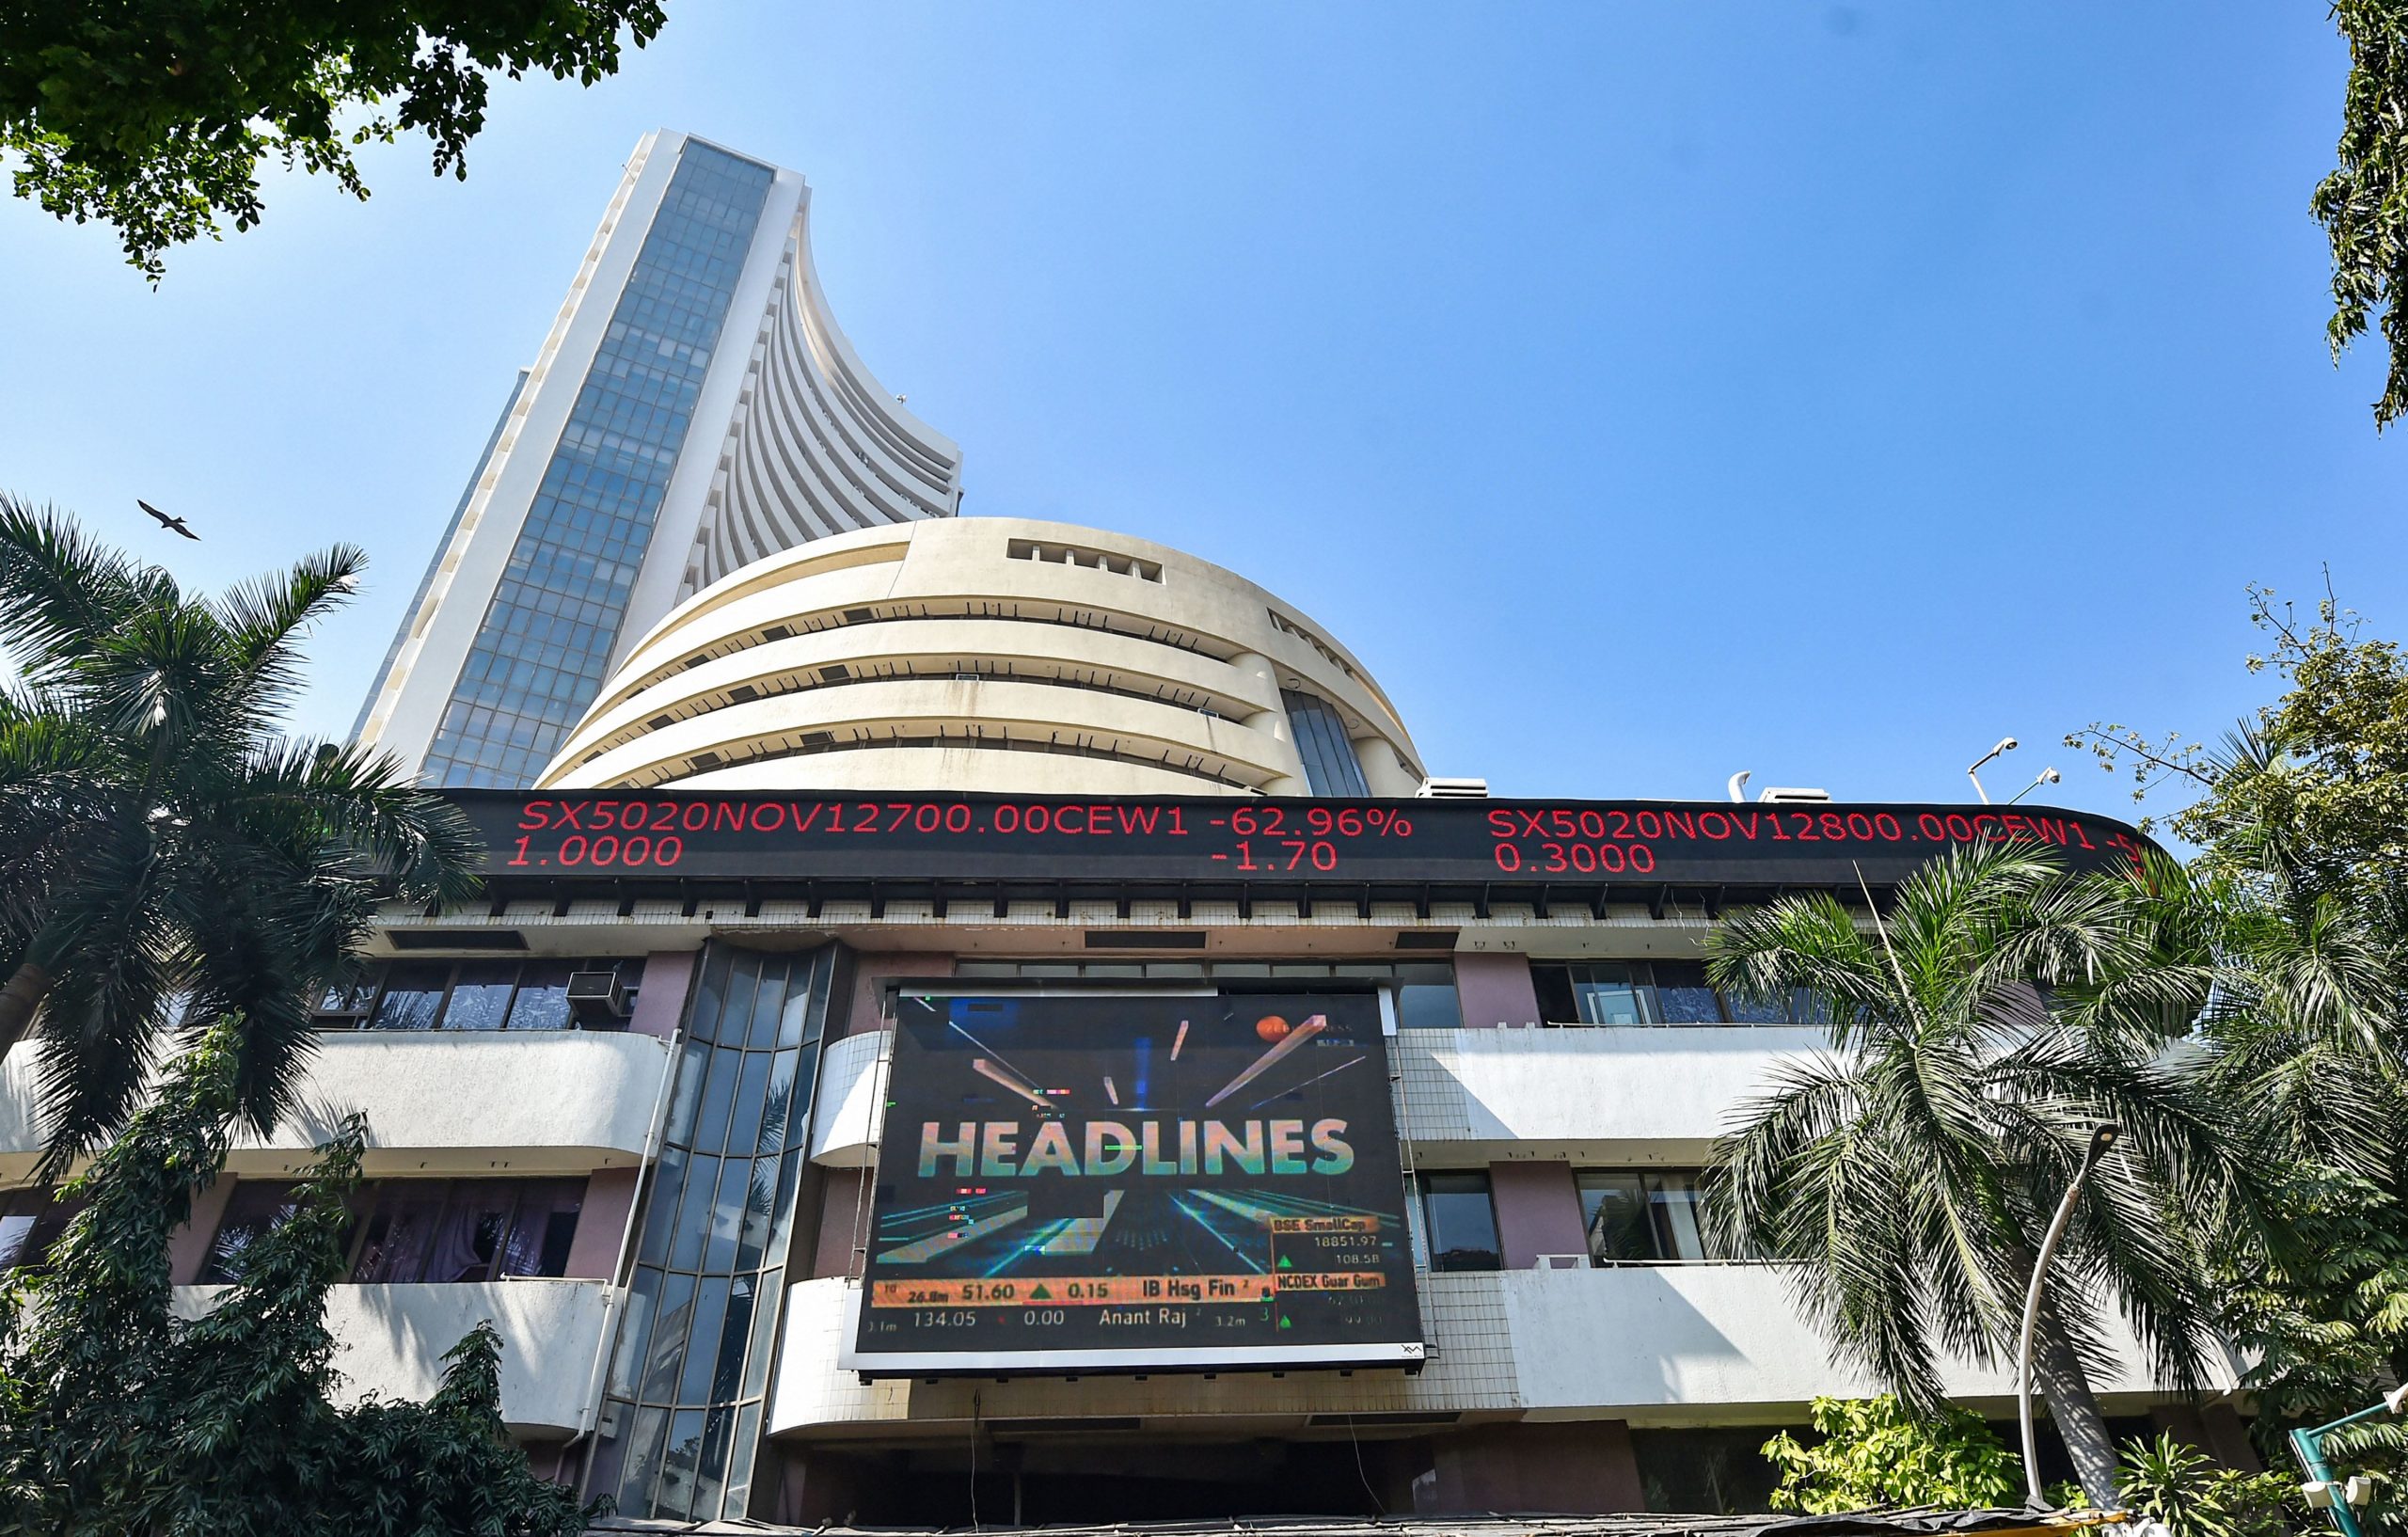 Trending Stocks: HDFC, HCL, Vedanta, PB Fintech, CESC and others in news today